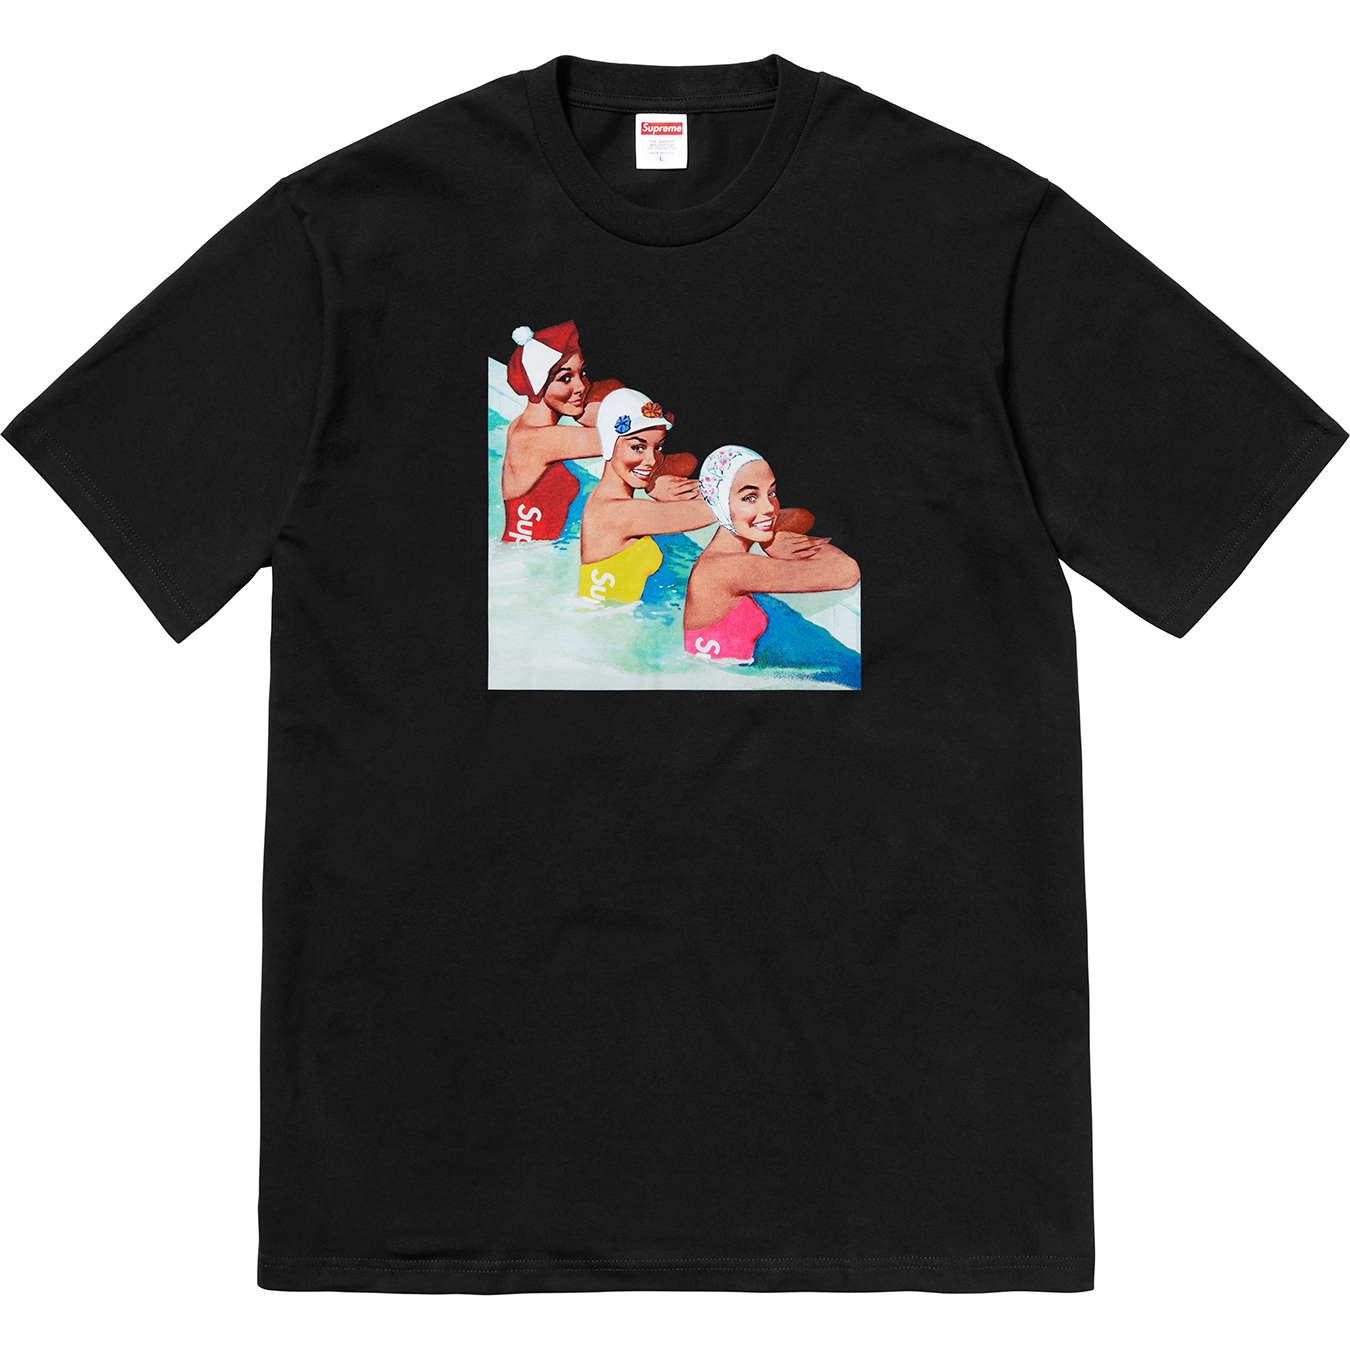 Supreme Swimmers Tee White Men's - SS18 - US